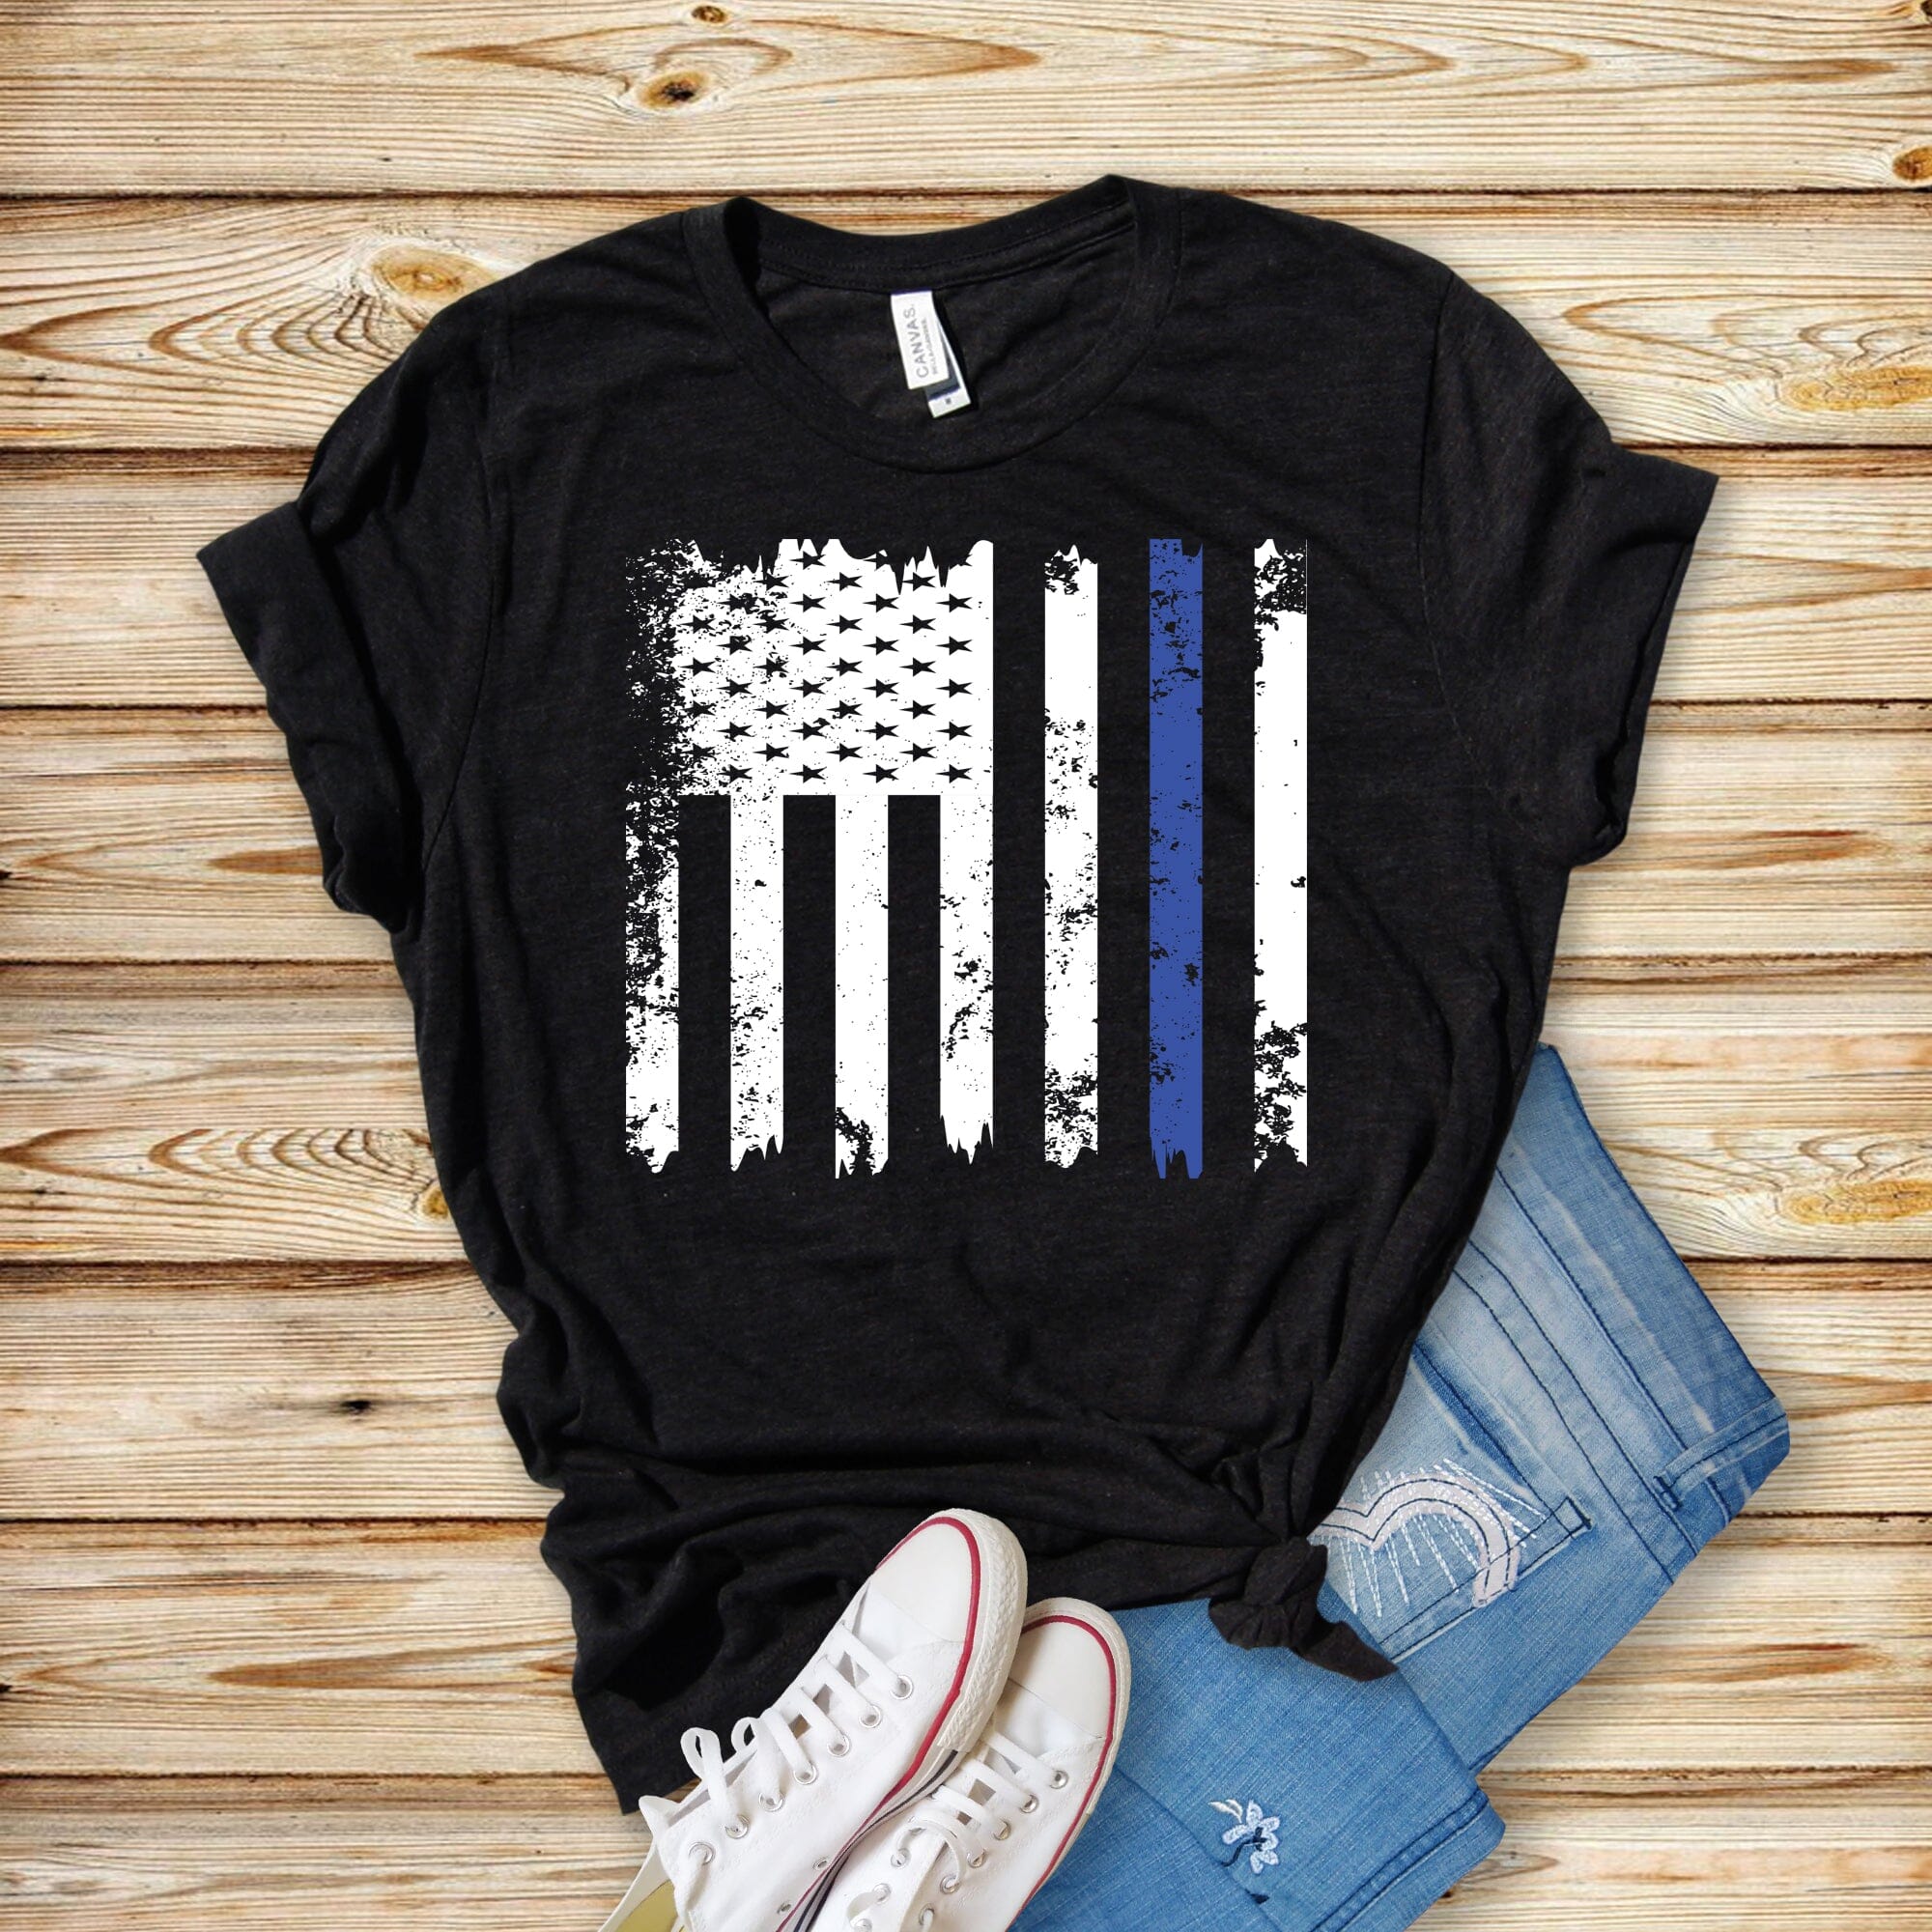 Thin blue line flag T-shirt Gravesfamilycreations